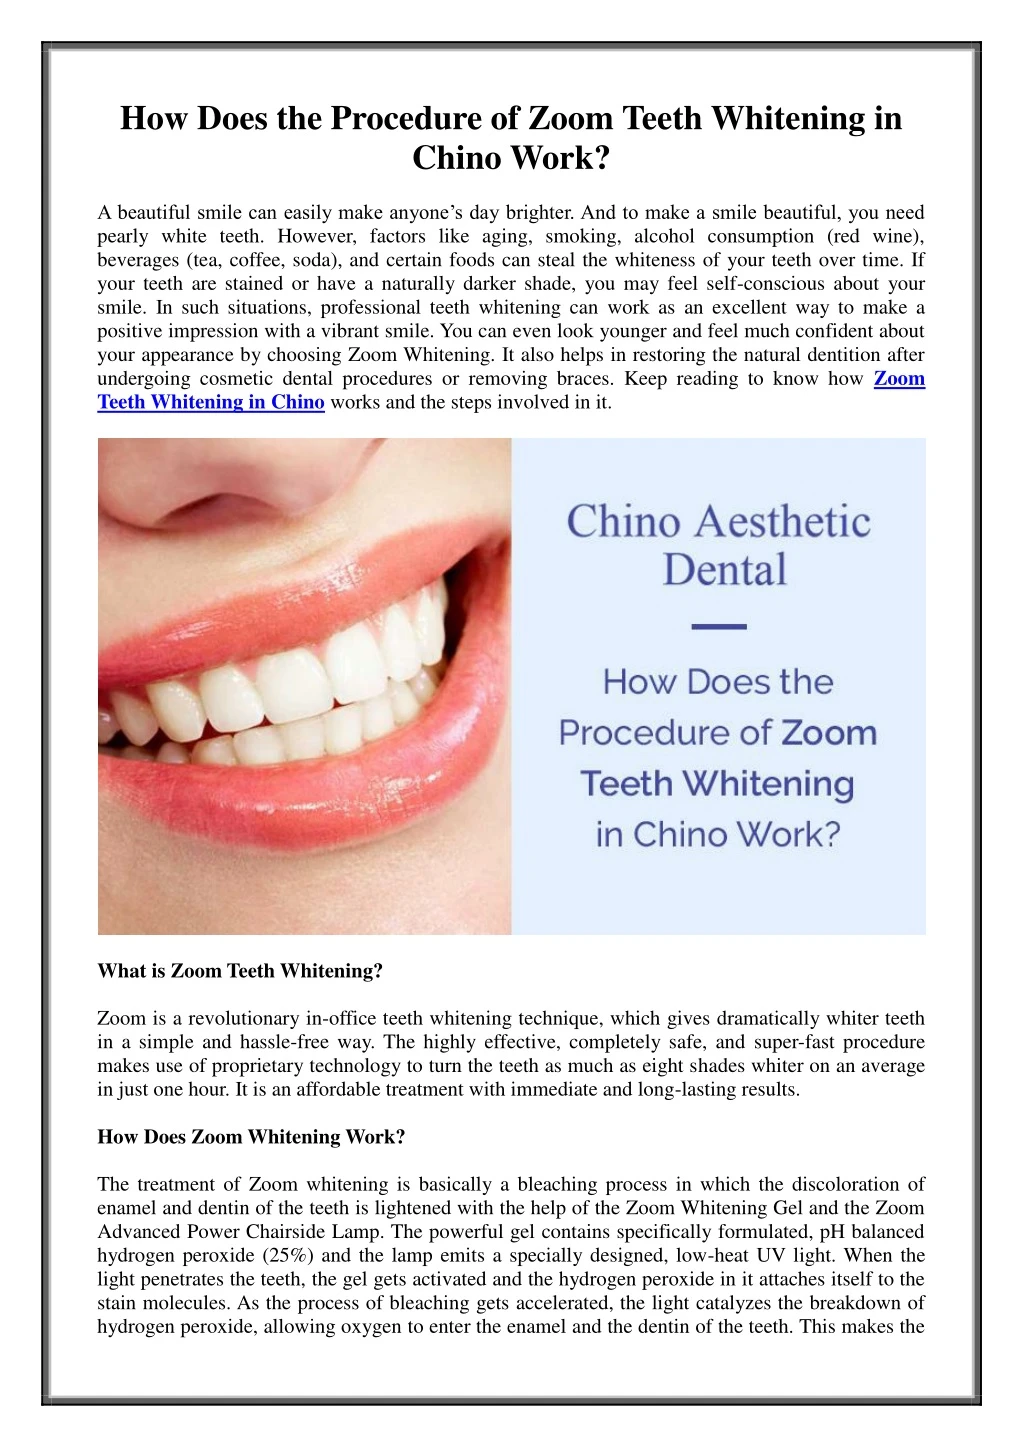 how does the procedure of zoom teeth whitening